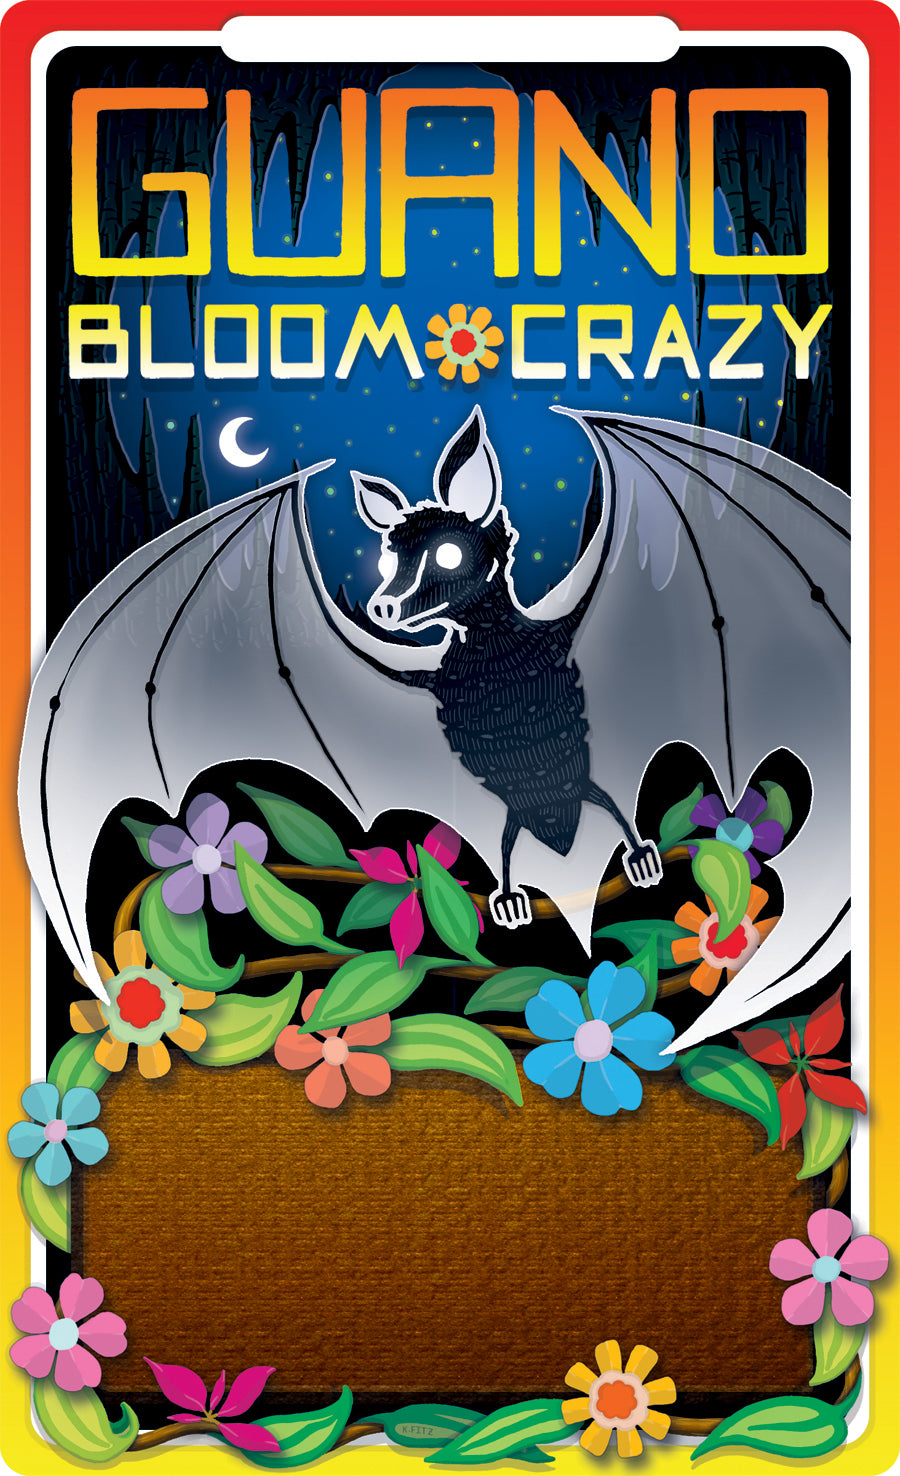 Hydro Farm's Guano Bloom Crazy Product Label